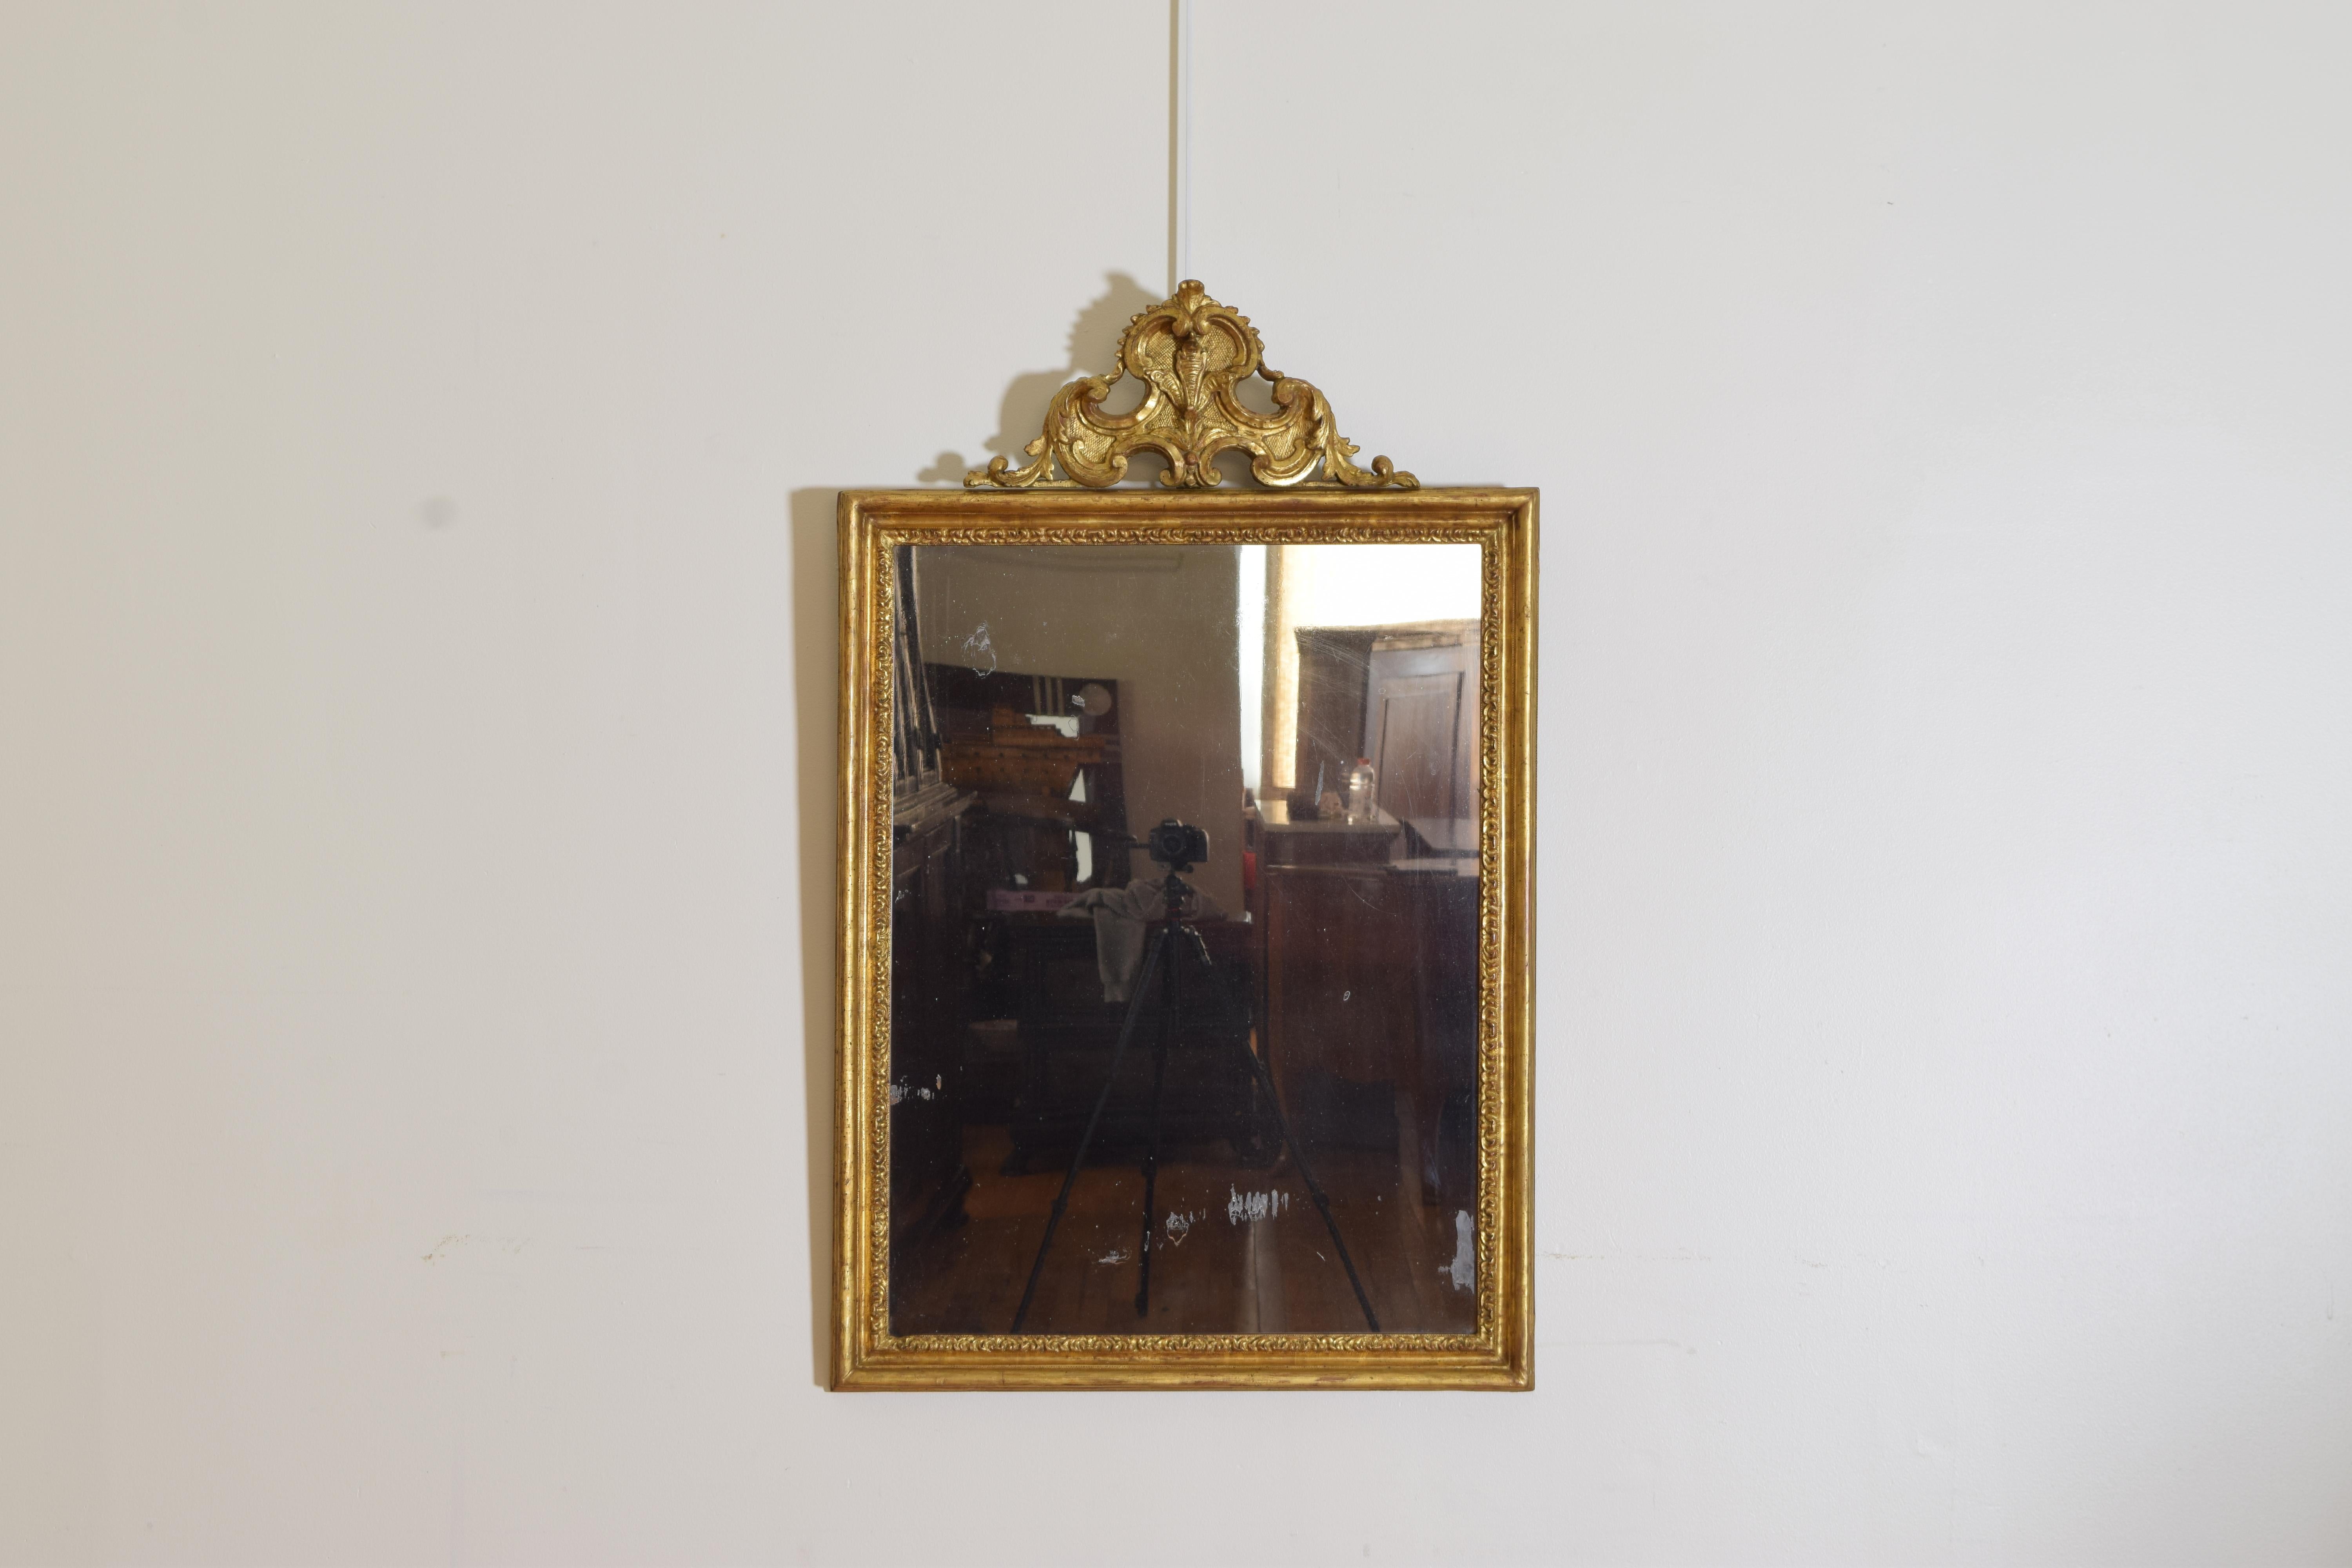 Of rectangular form with scroll carved and punchwork moldings this mirror also has a prominent pediment in cartouche form, in beautifully restored condition, retains antique mirrorplate.